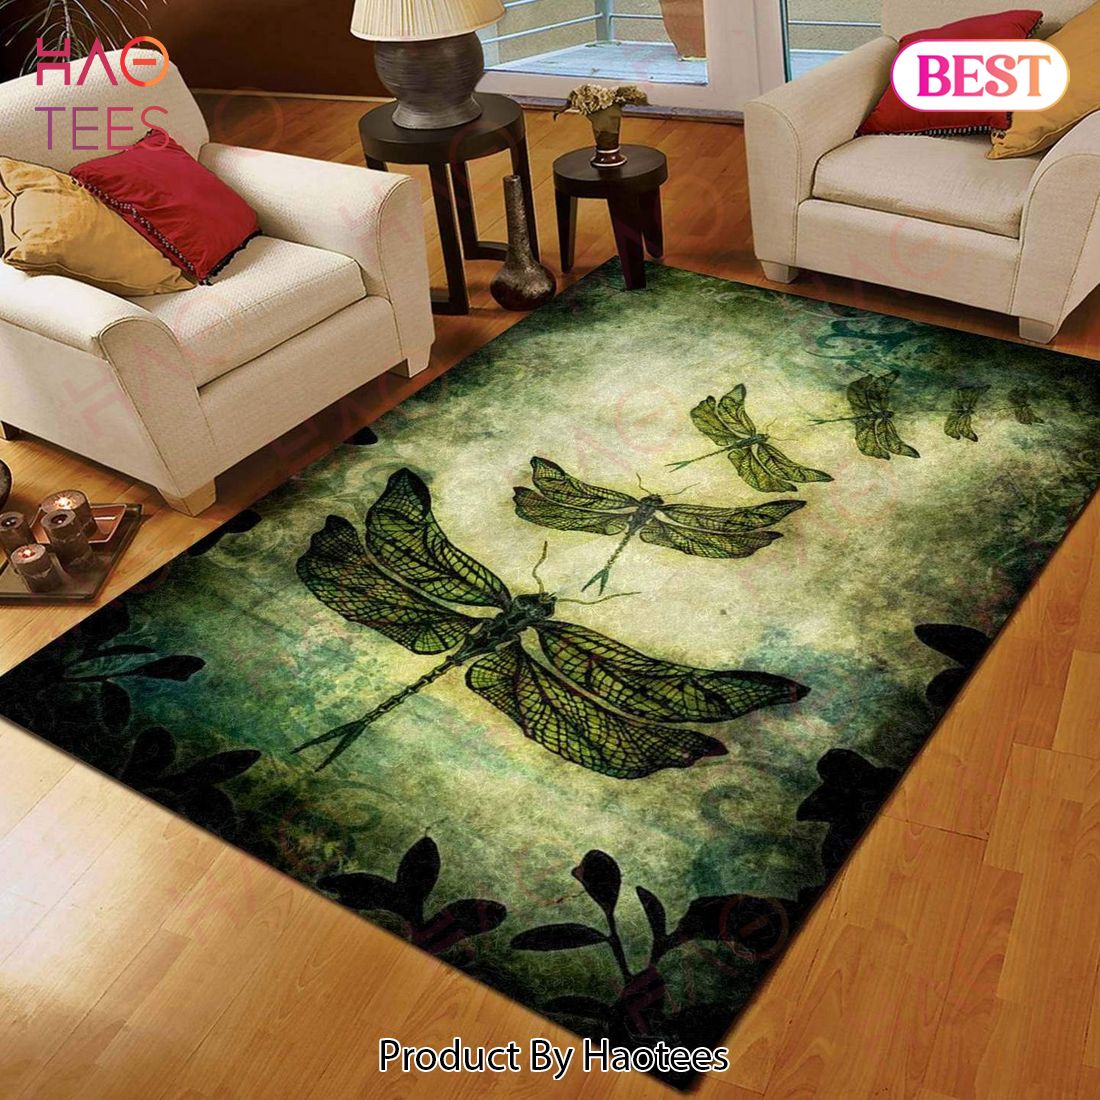 Dragonfly Limited Edition Area Rugs Carpet Mat Kitchen Rugs Floor Decor – YW81